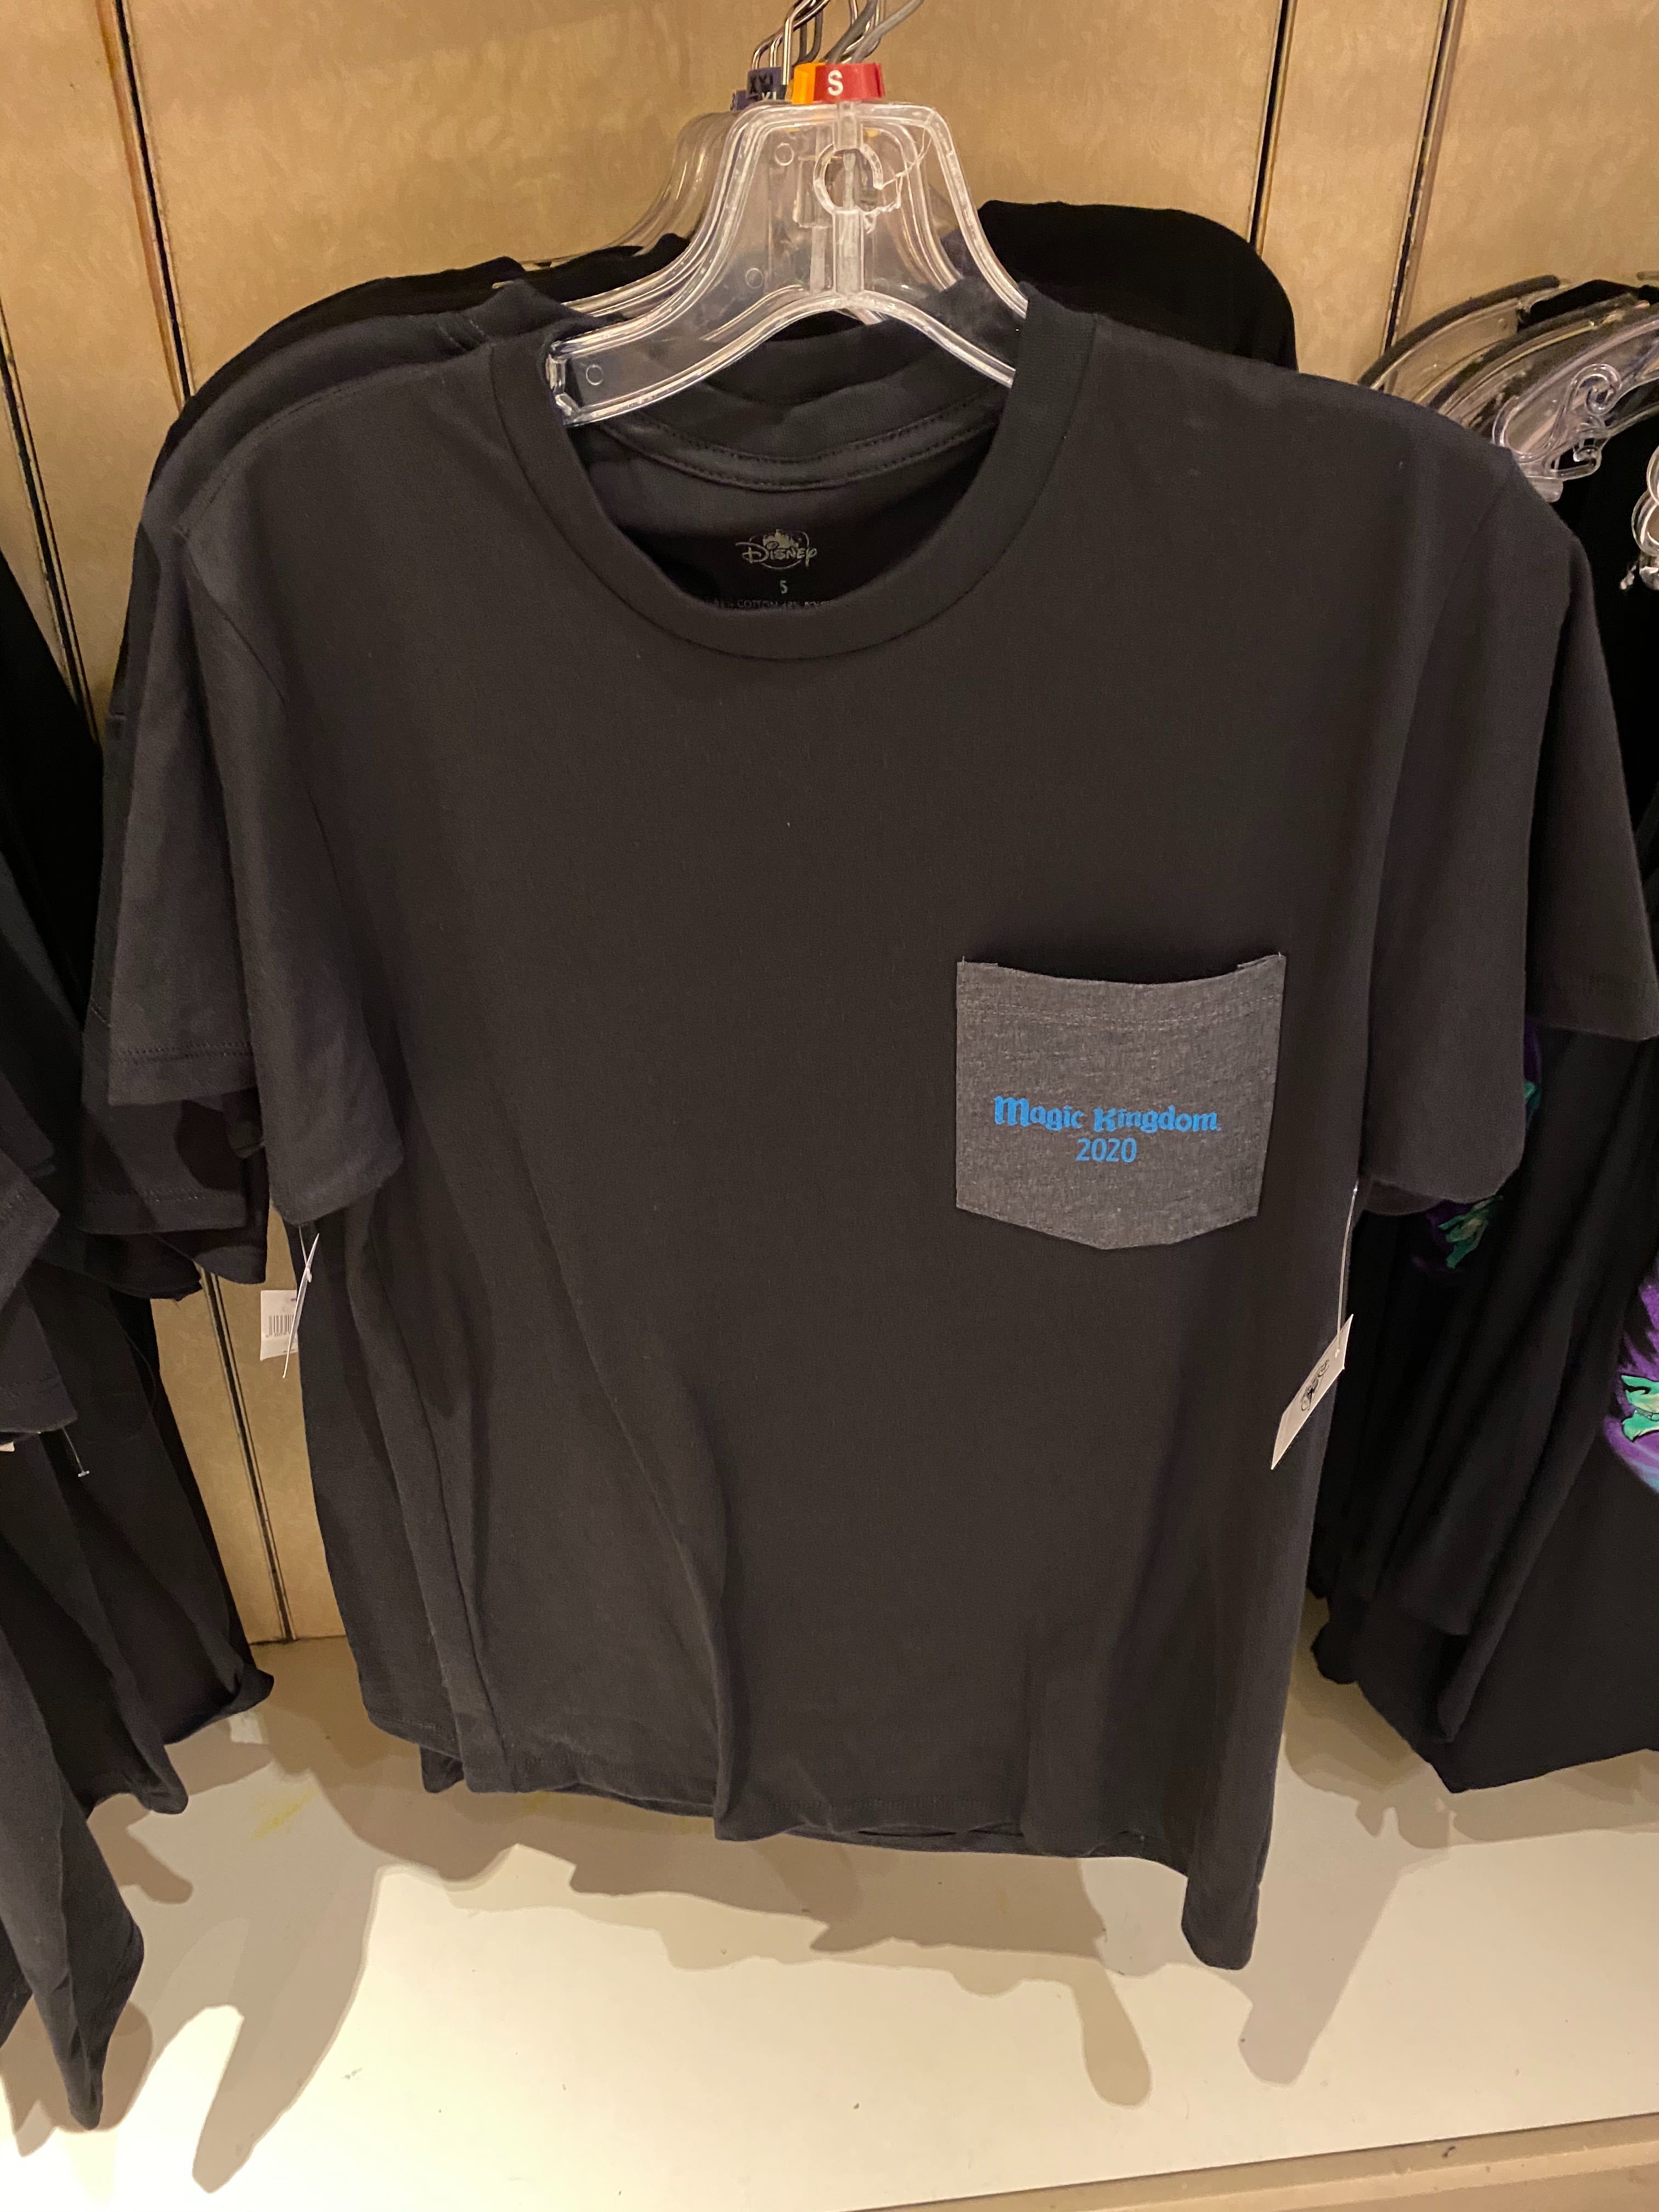 PHOTOS: Every Piece of New Merchandise (with Prices) for Disney ...